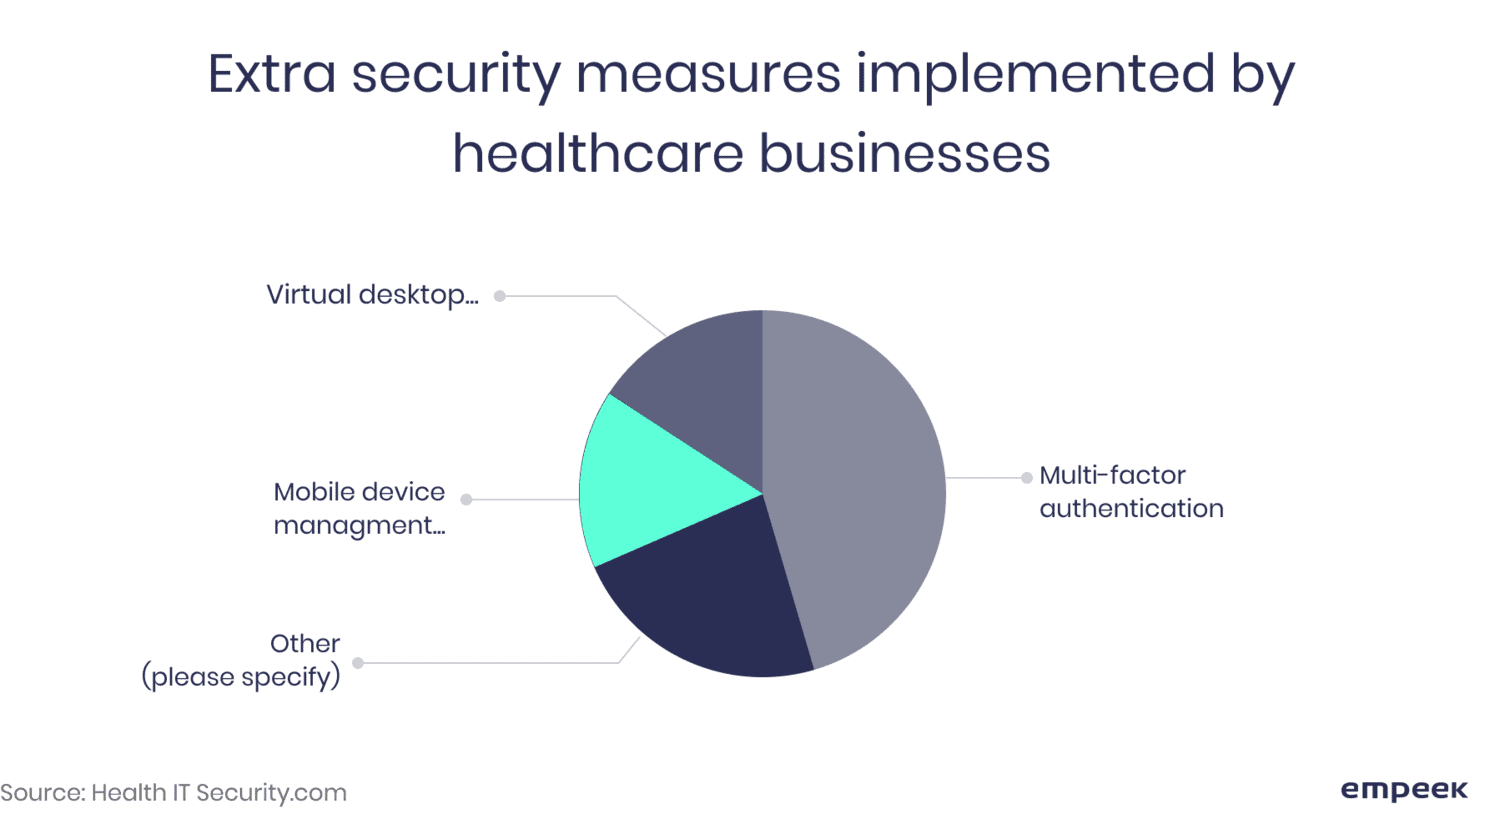 Extra security measures implemented by healthcare businesses chart